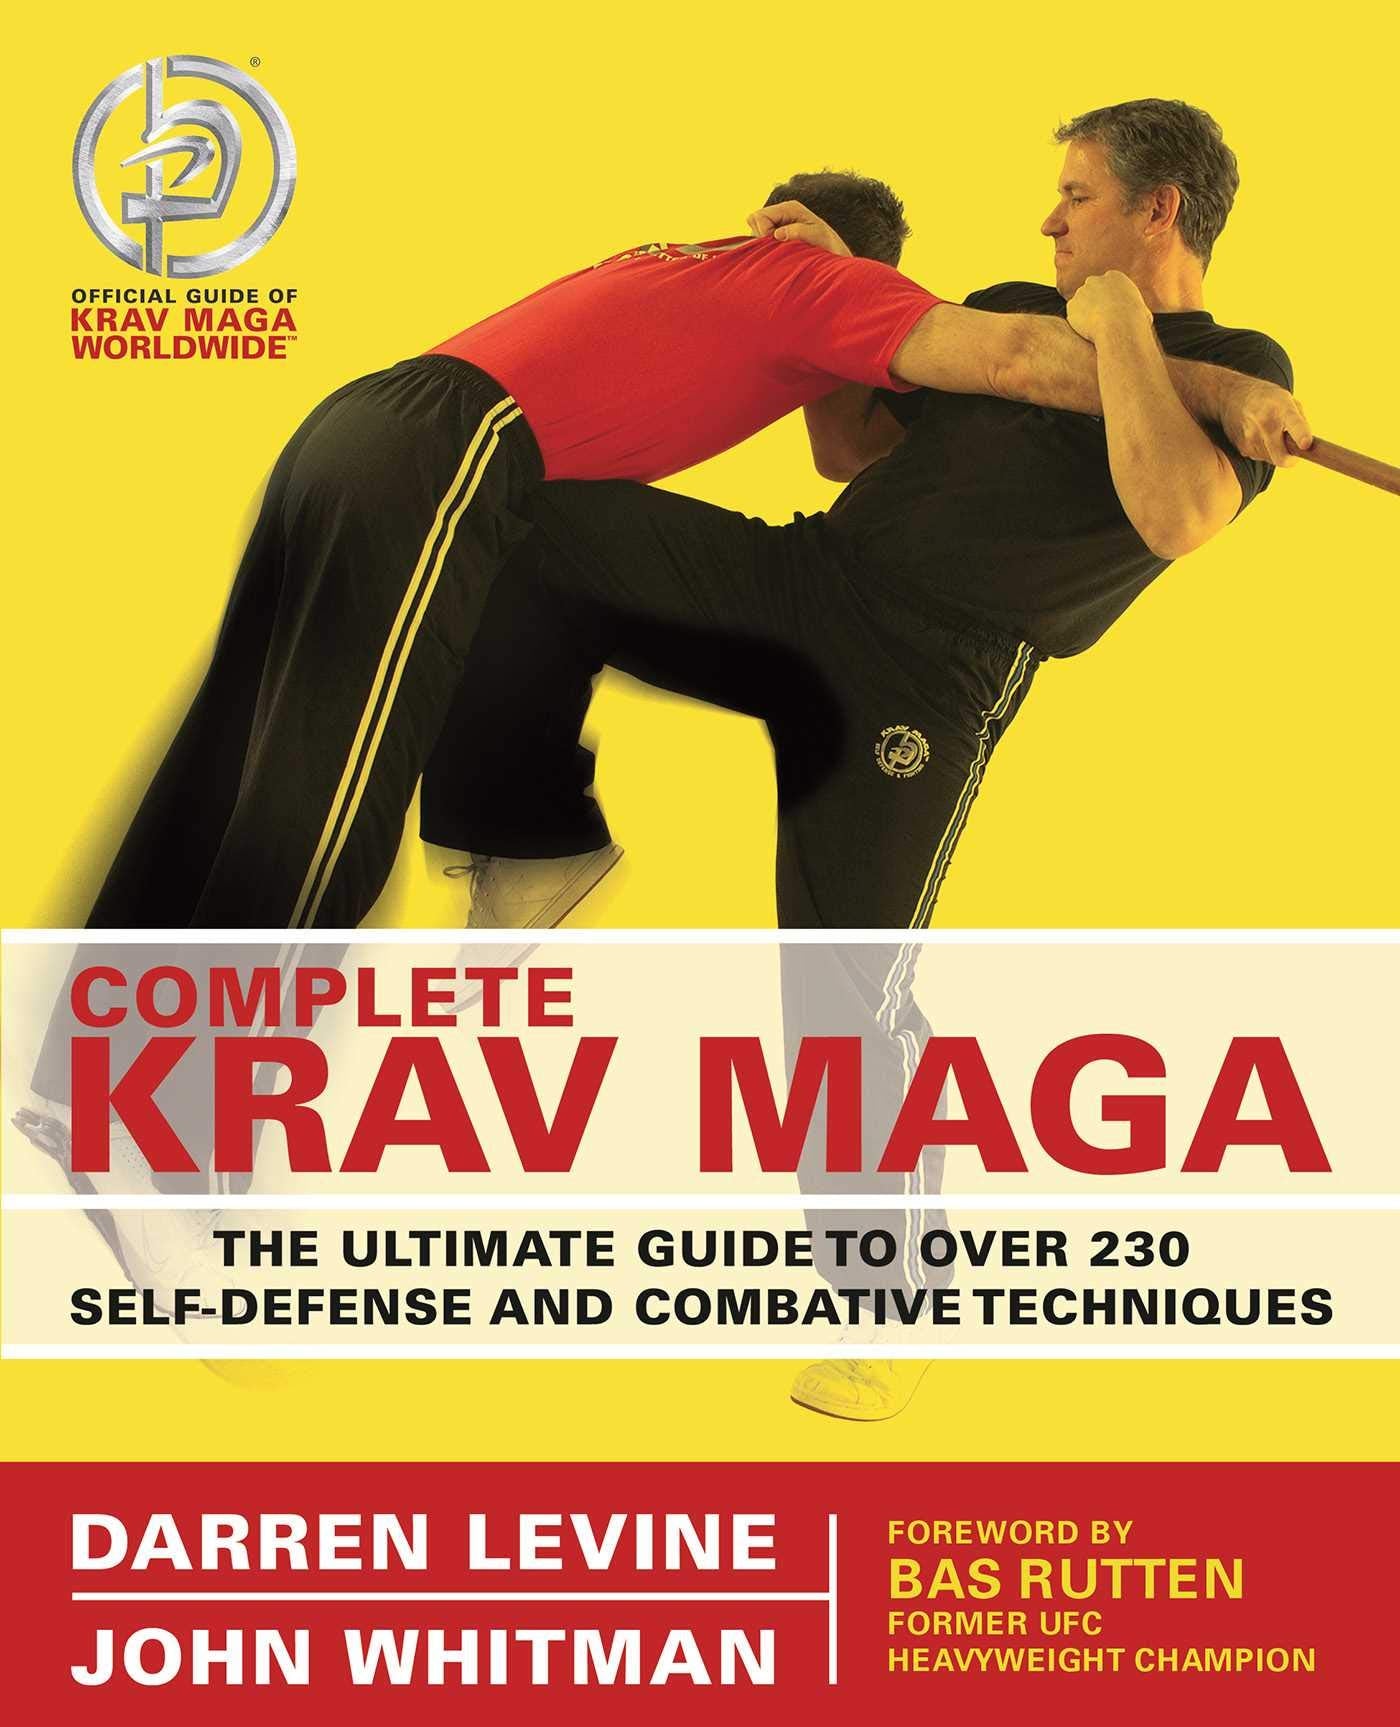 Complete Krav Maga: The Ultimate Guide to Over 230 Self-Defense and Combative Techniques Book by Darren Levine (Preowned) - Budovideos Inc